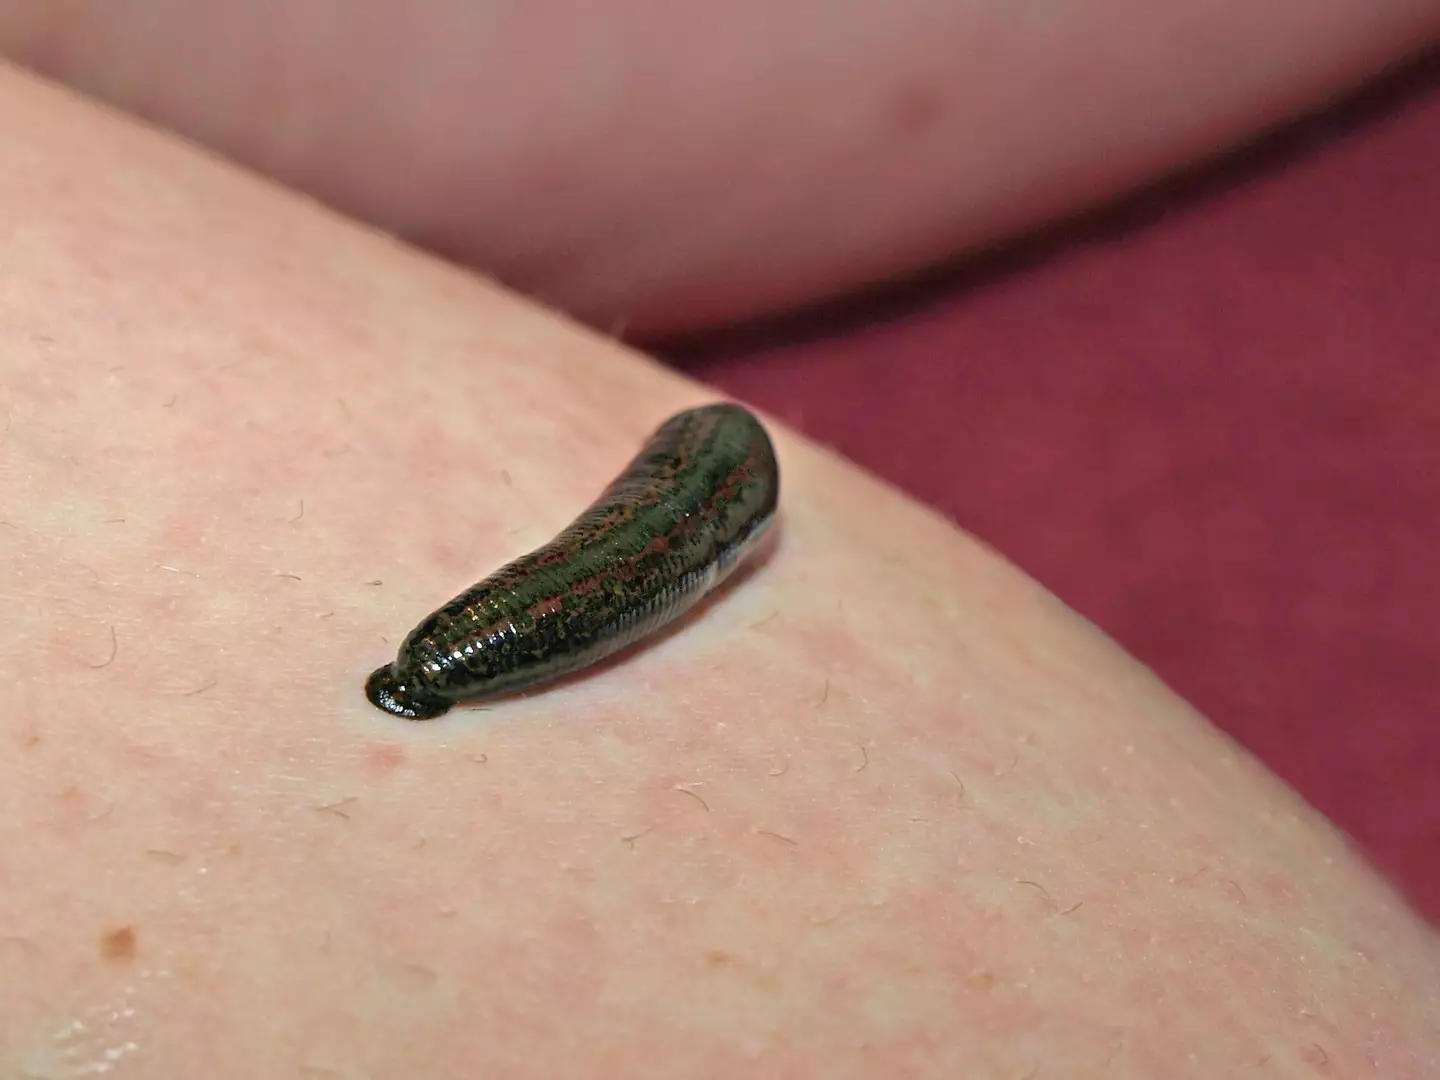 Leeches have been used to help with 'hypertension, varicose veins, hemorrhoids, skin problems and arthritis'.